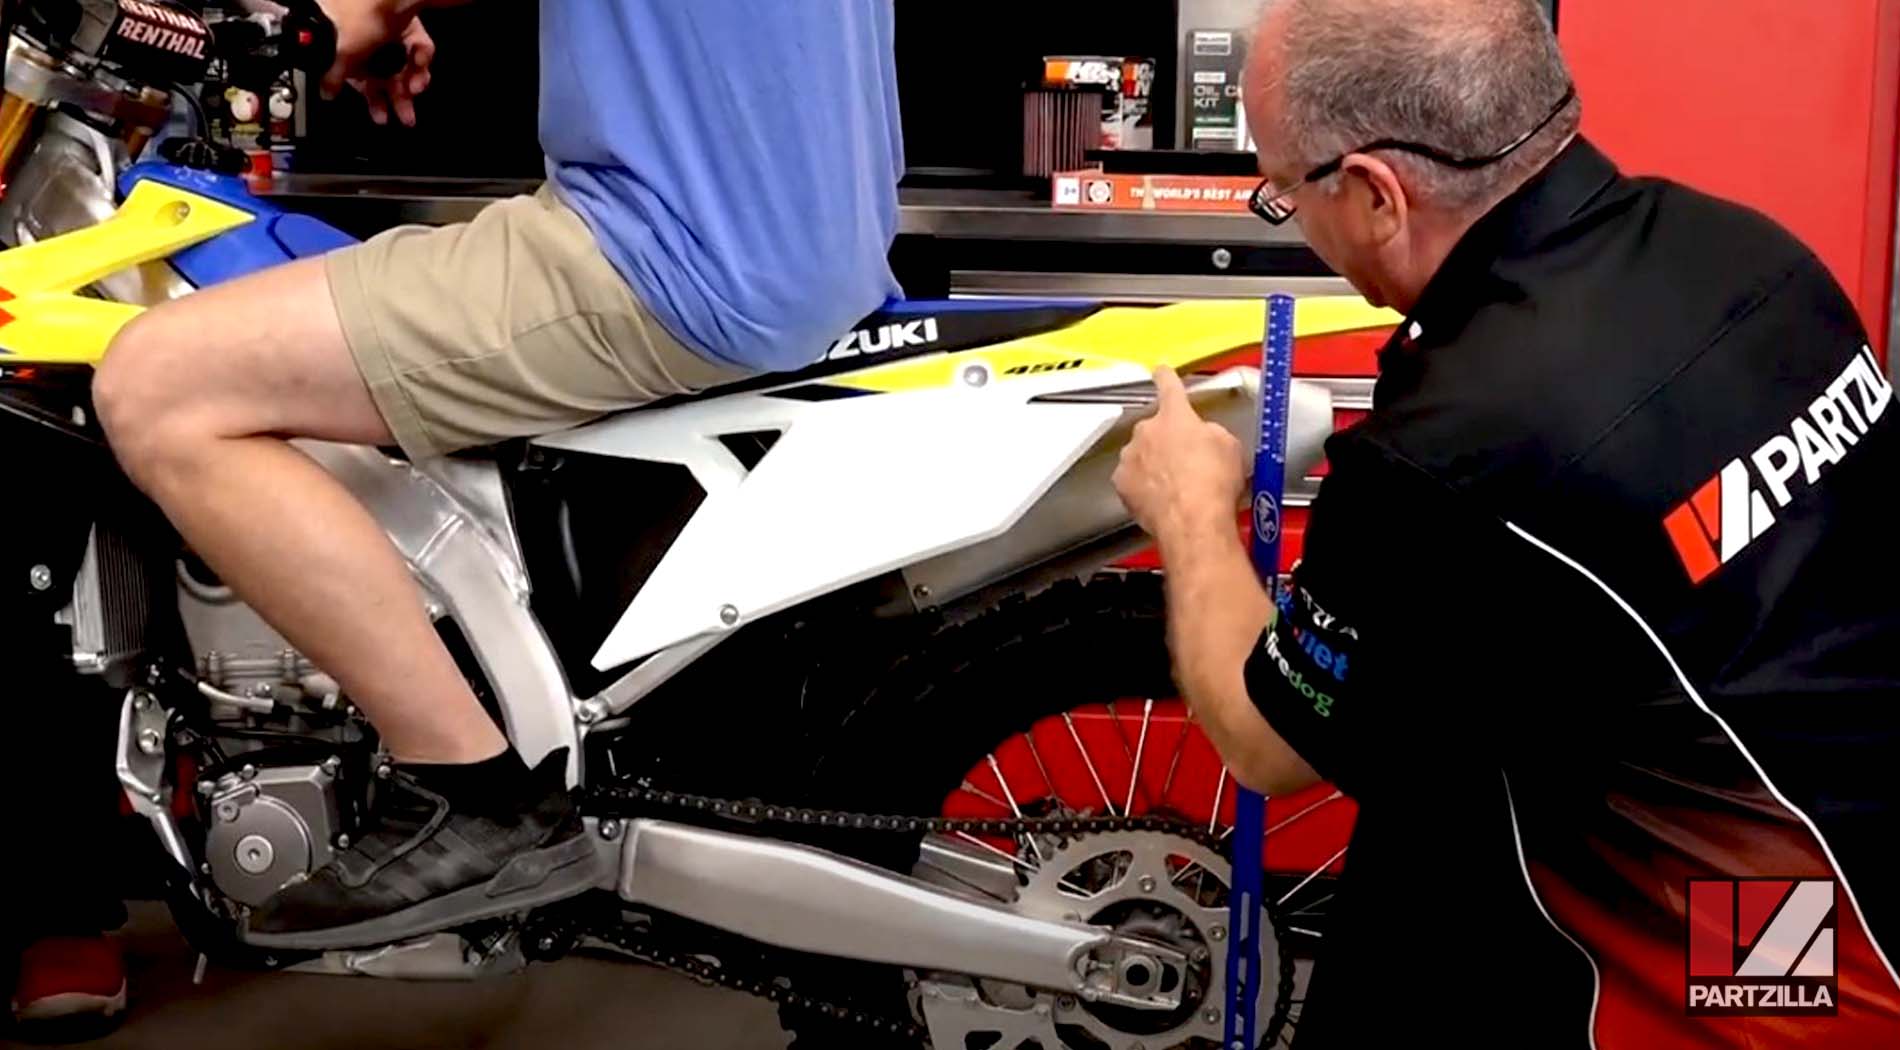 How to measure motorcycle sag